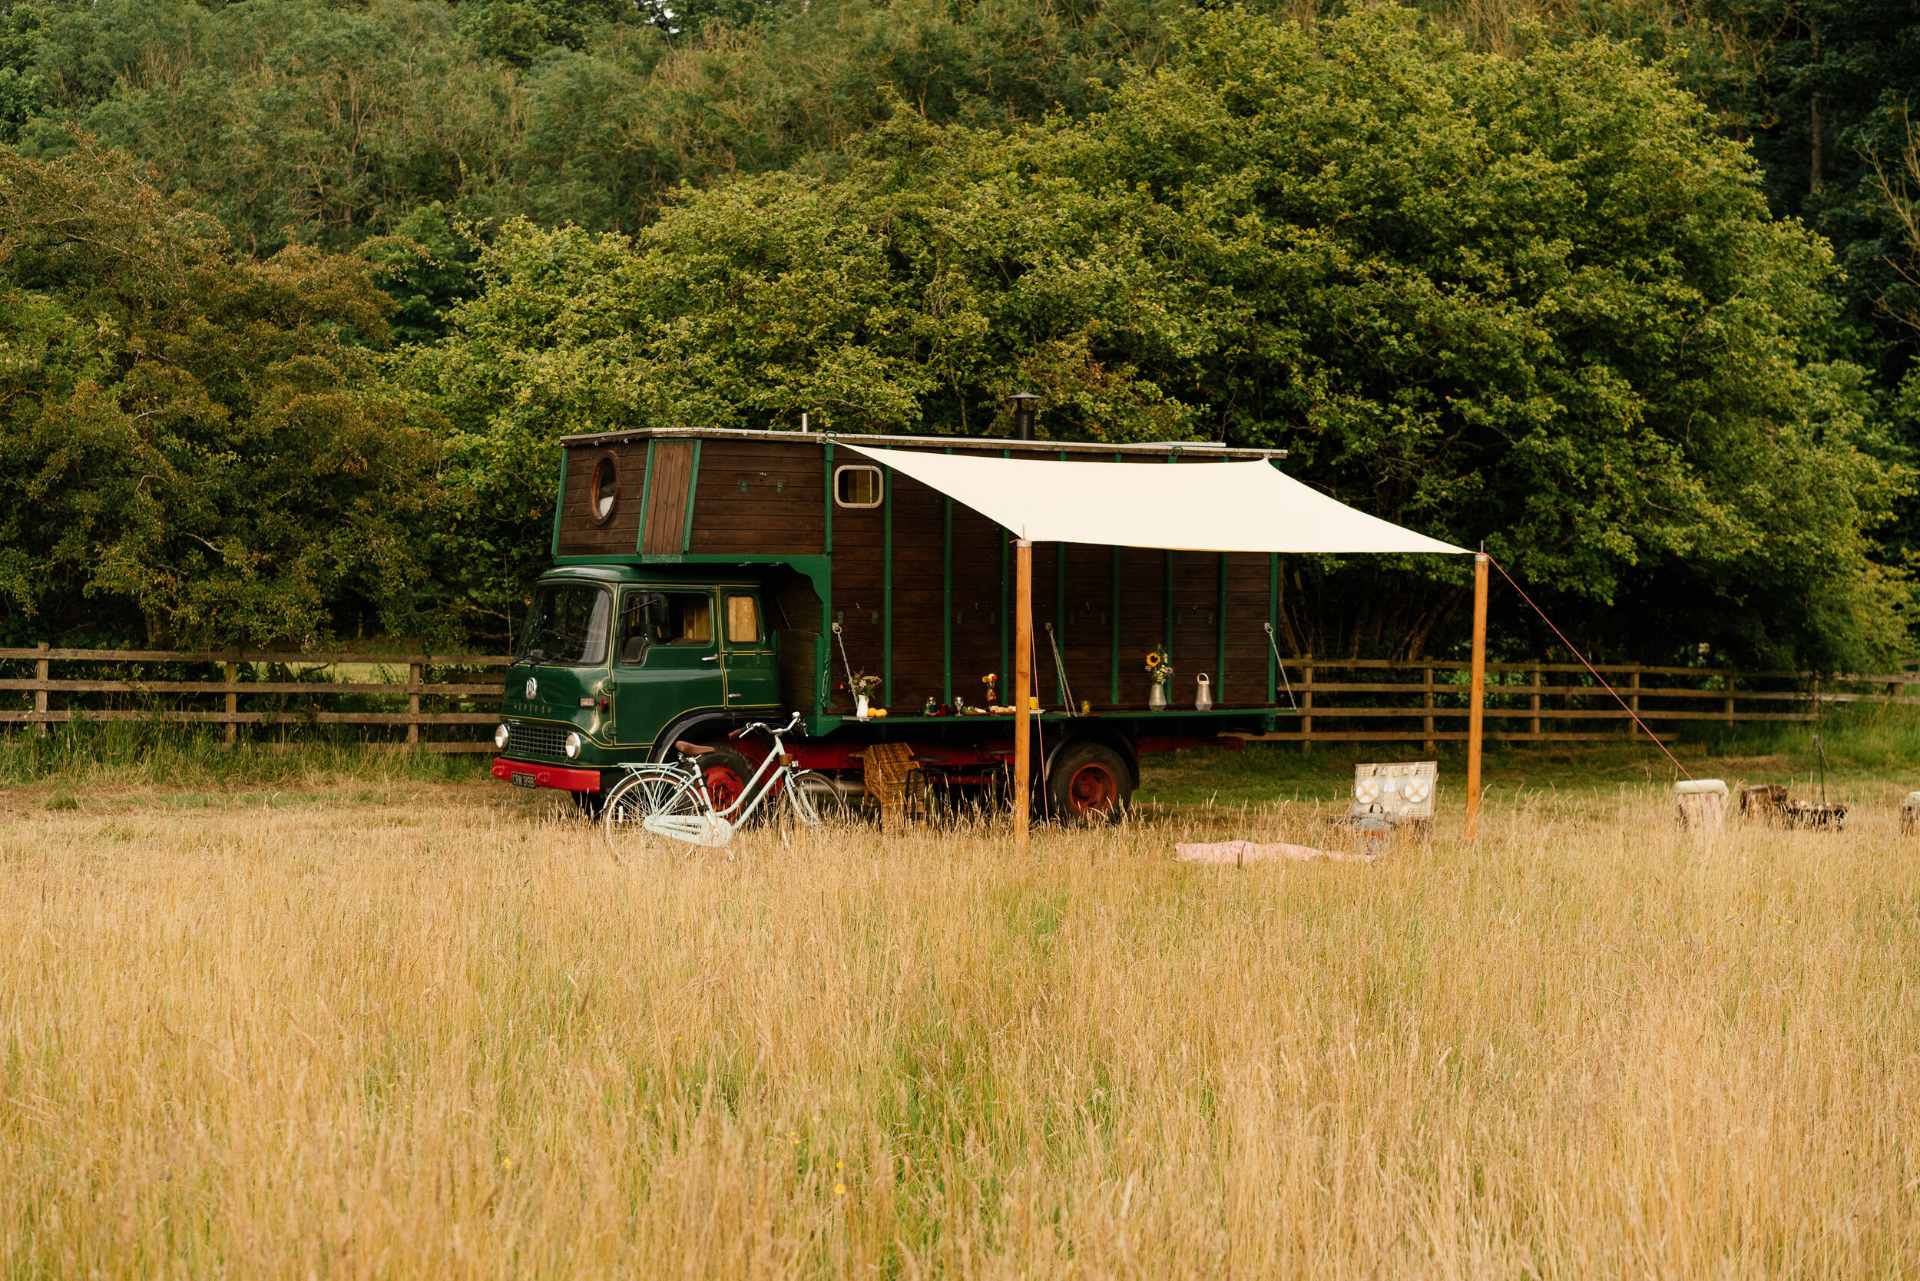 green-horsebox-grassy-in-field-at-abbeyfield-glamping-northumberland